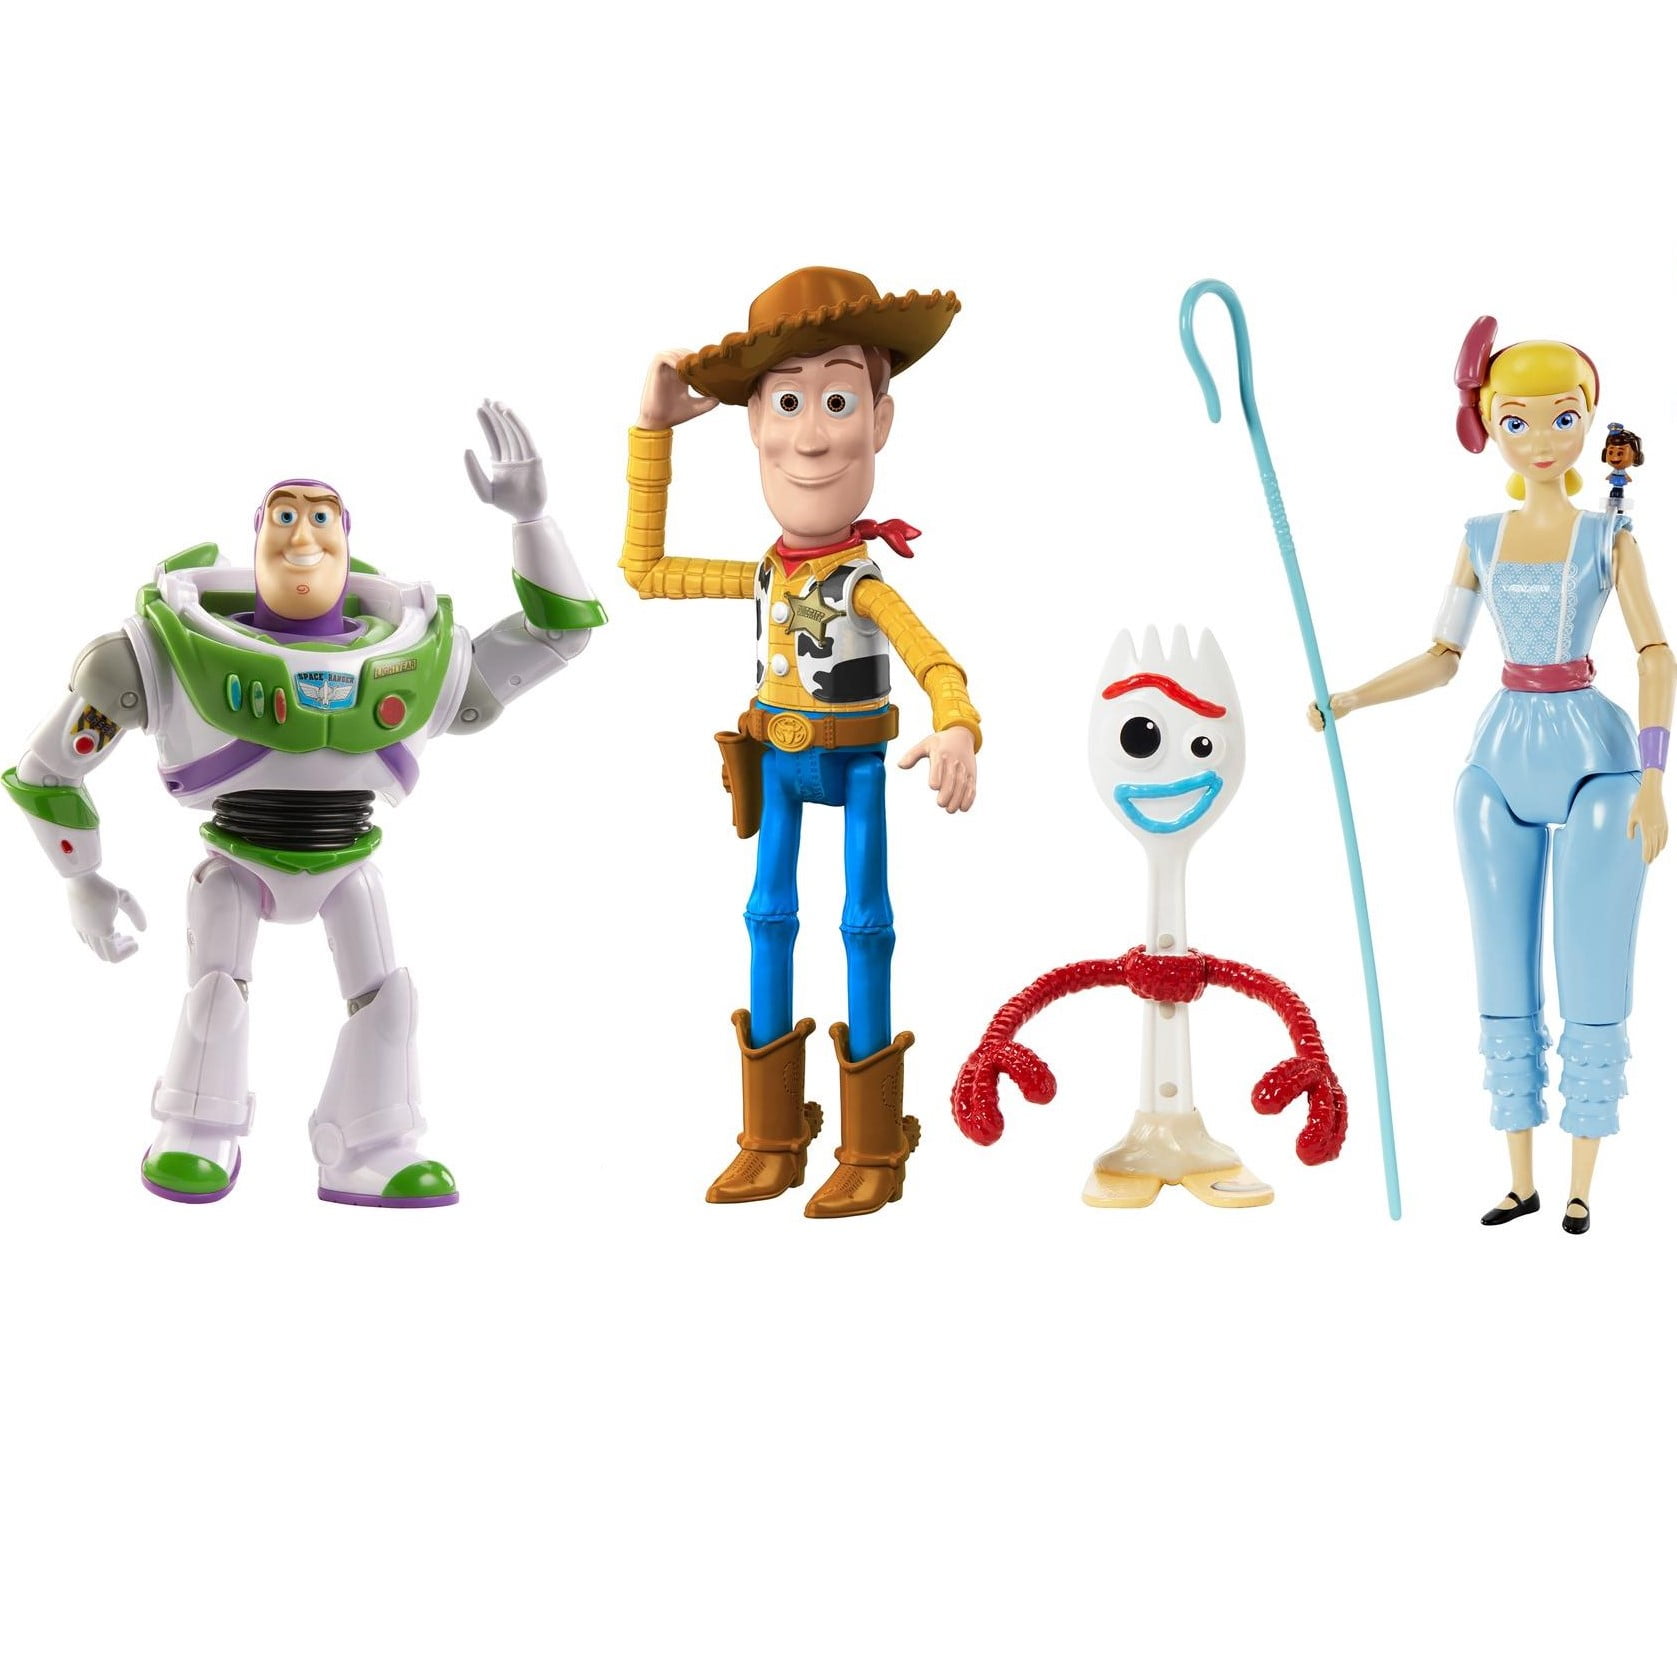 Doll Action Figures Figurine Playset TV Disney Channel Cartoon Characters Toys 